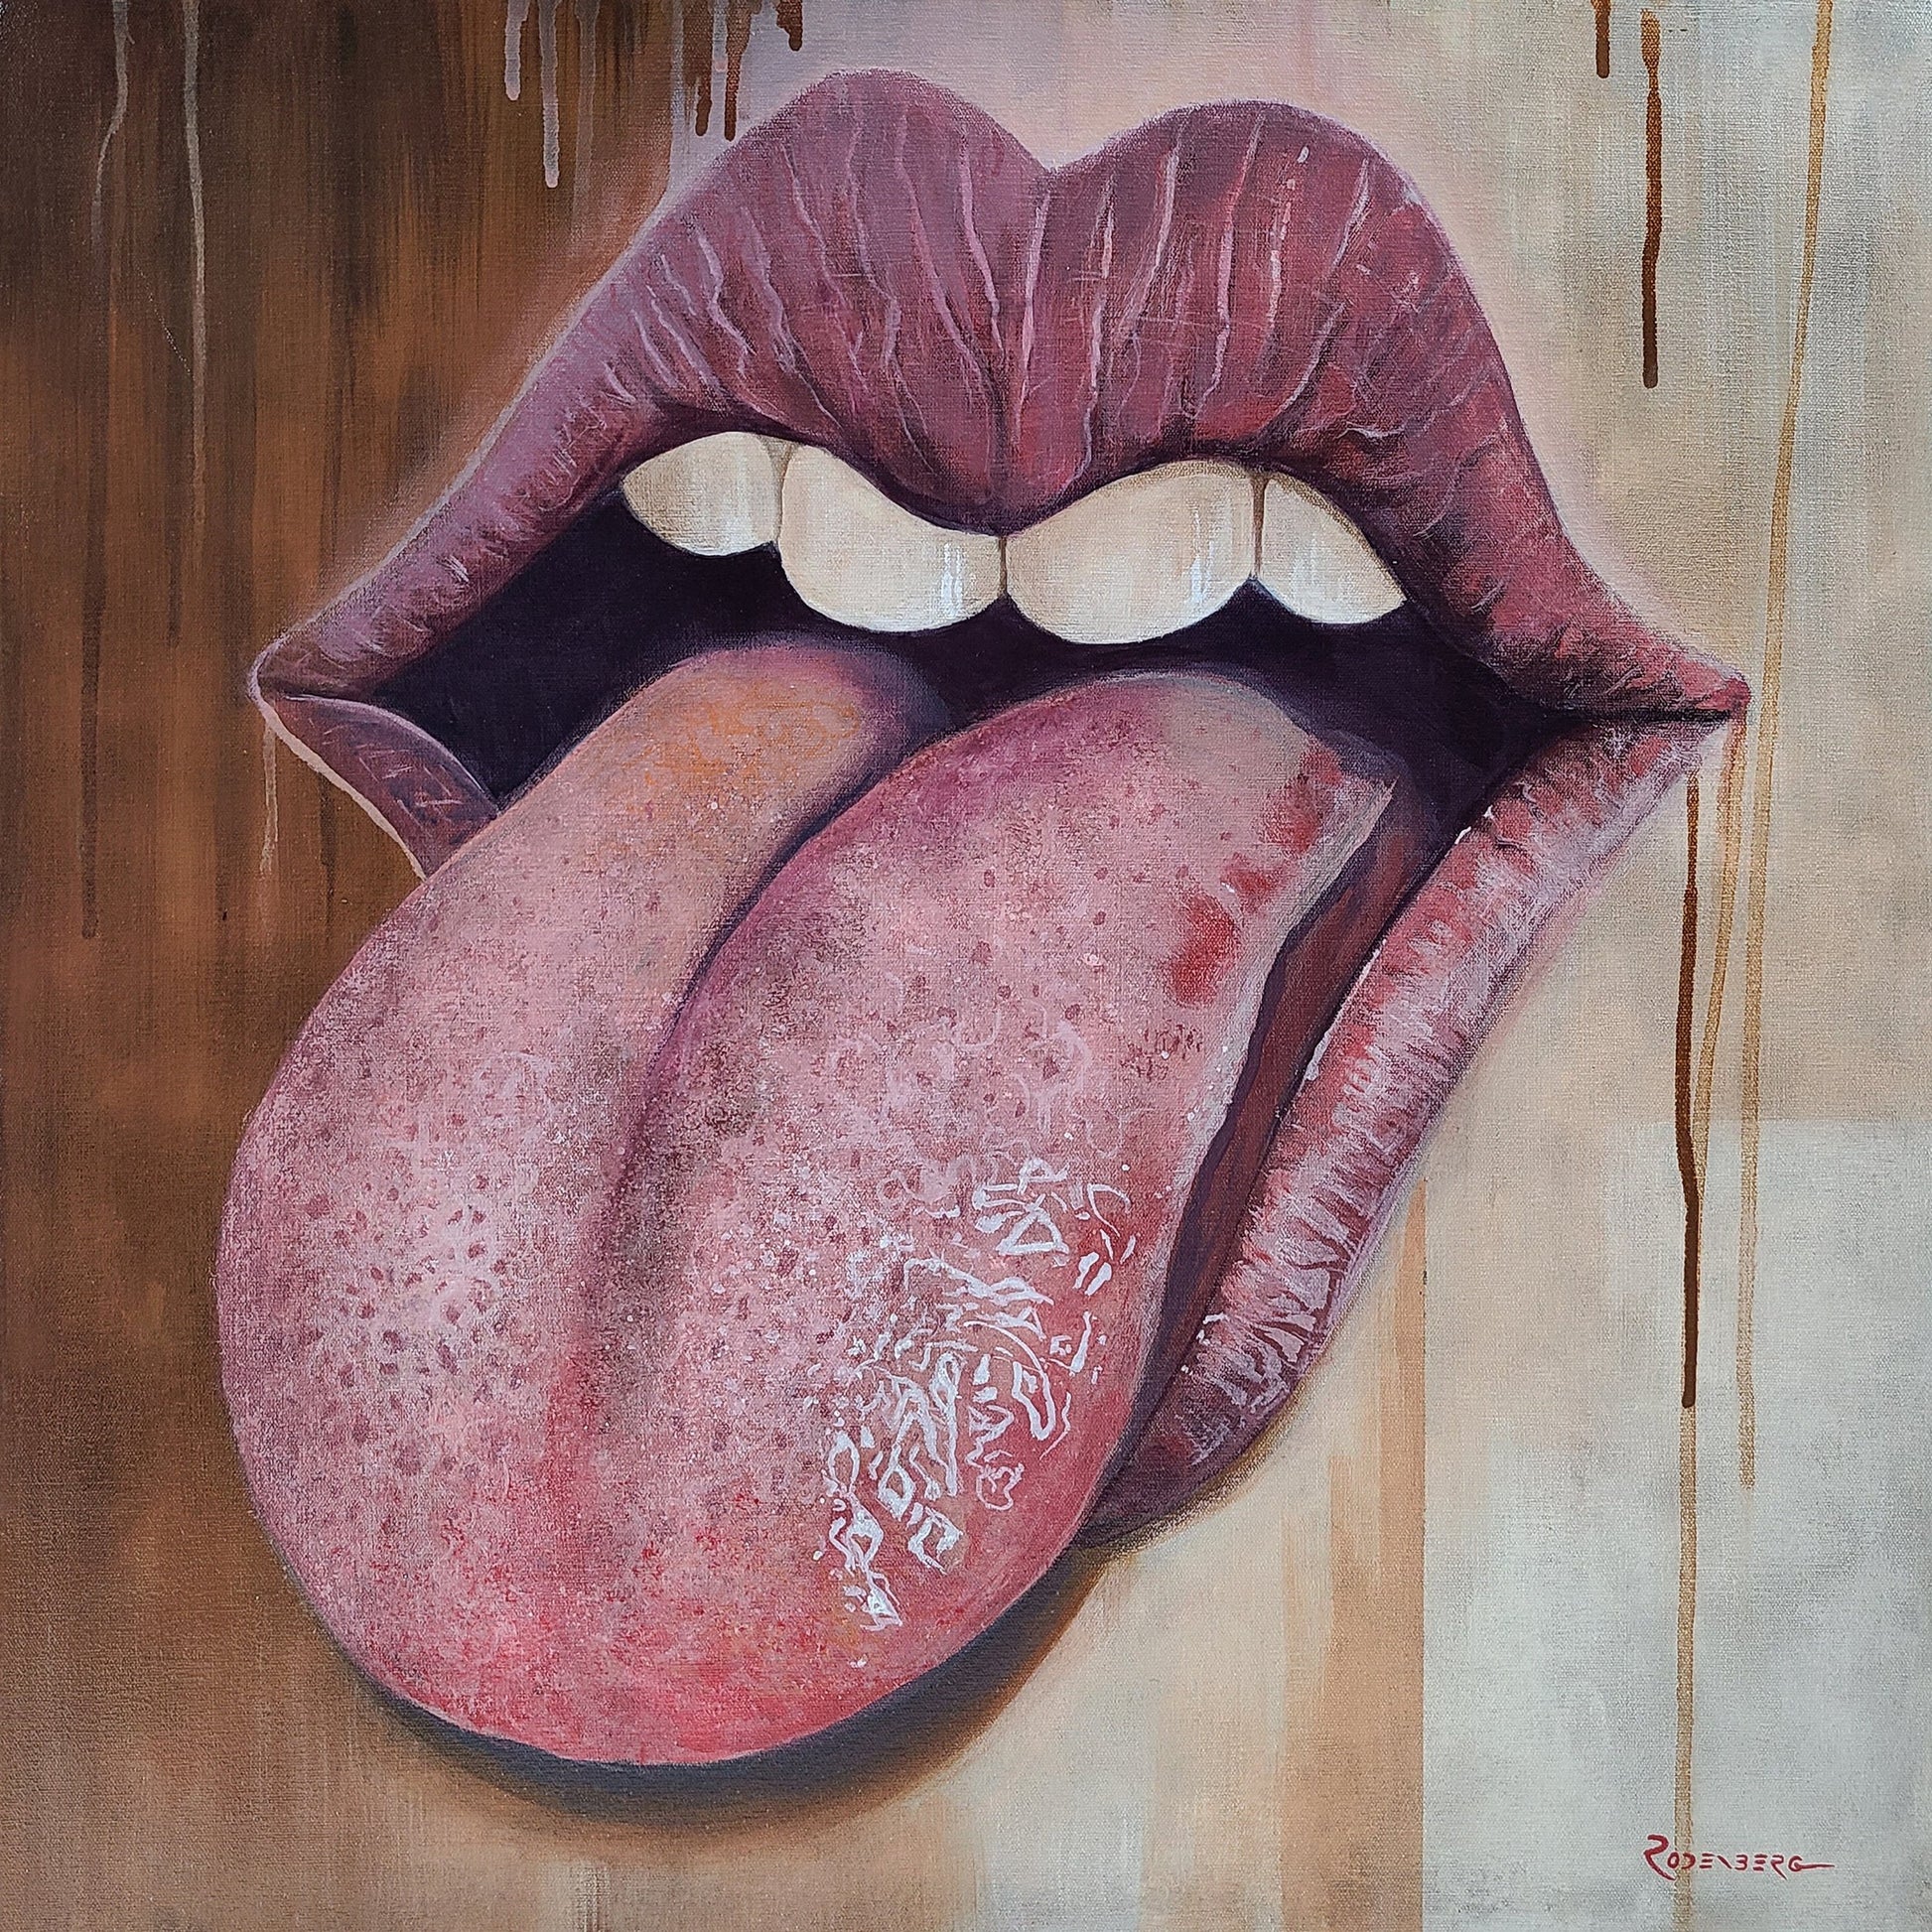 Rolling Stones tongue painting art by Jeff Rodenberg